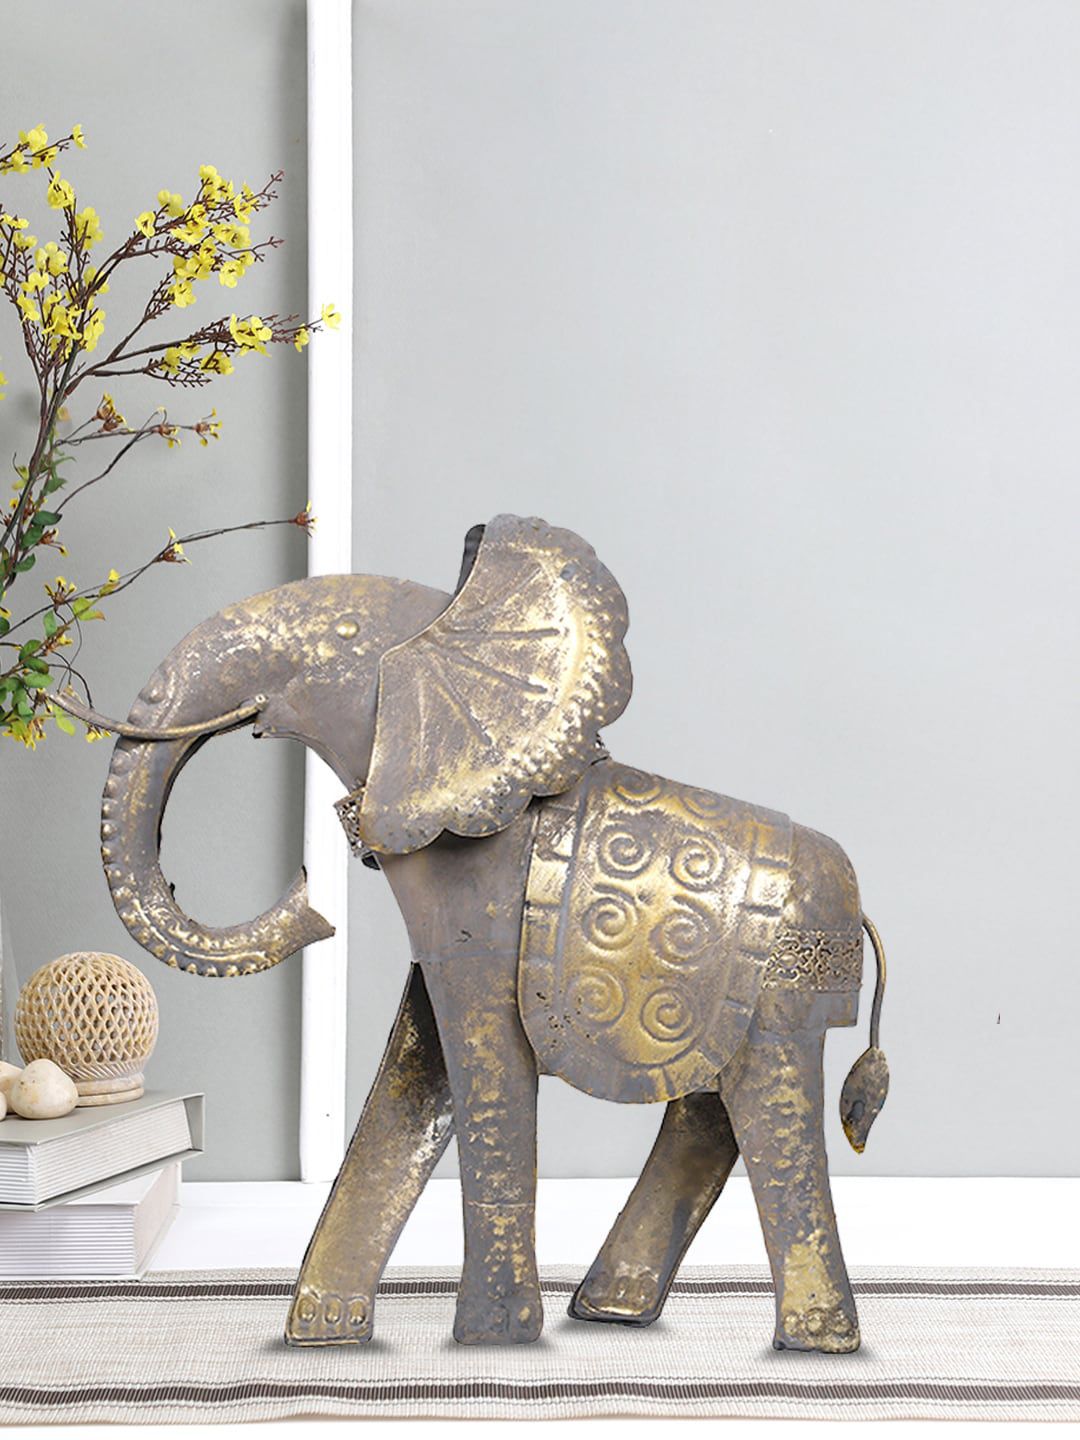 Aapno Rajasthan Gold-Toned Quaint Adhira Elephant Table Dcor Showpieces Price in India